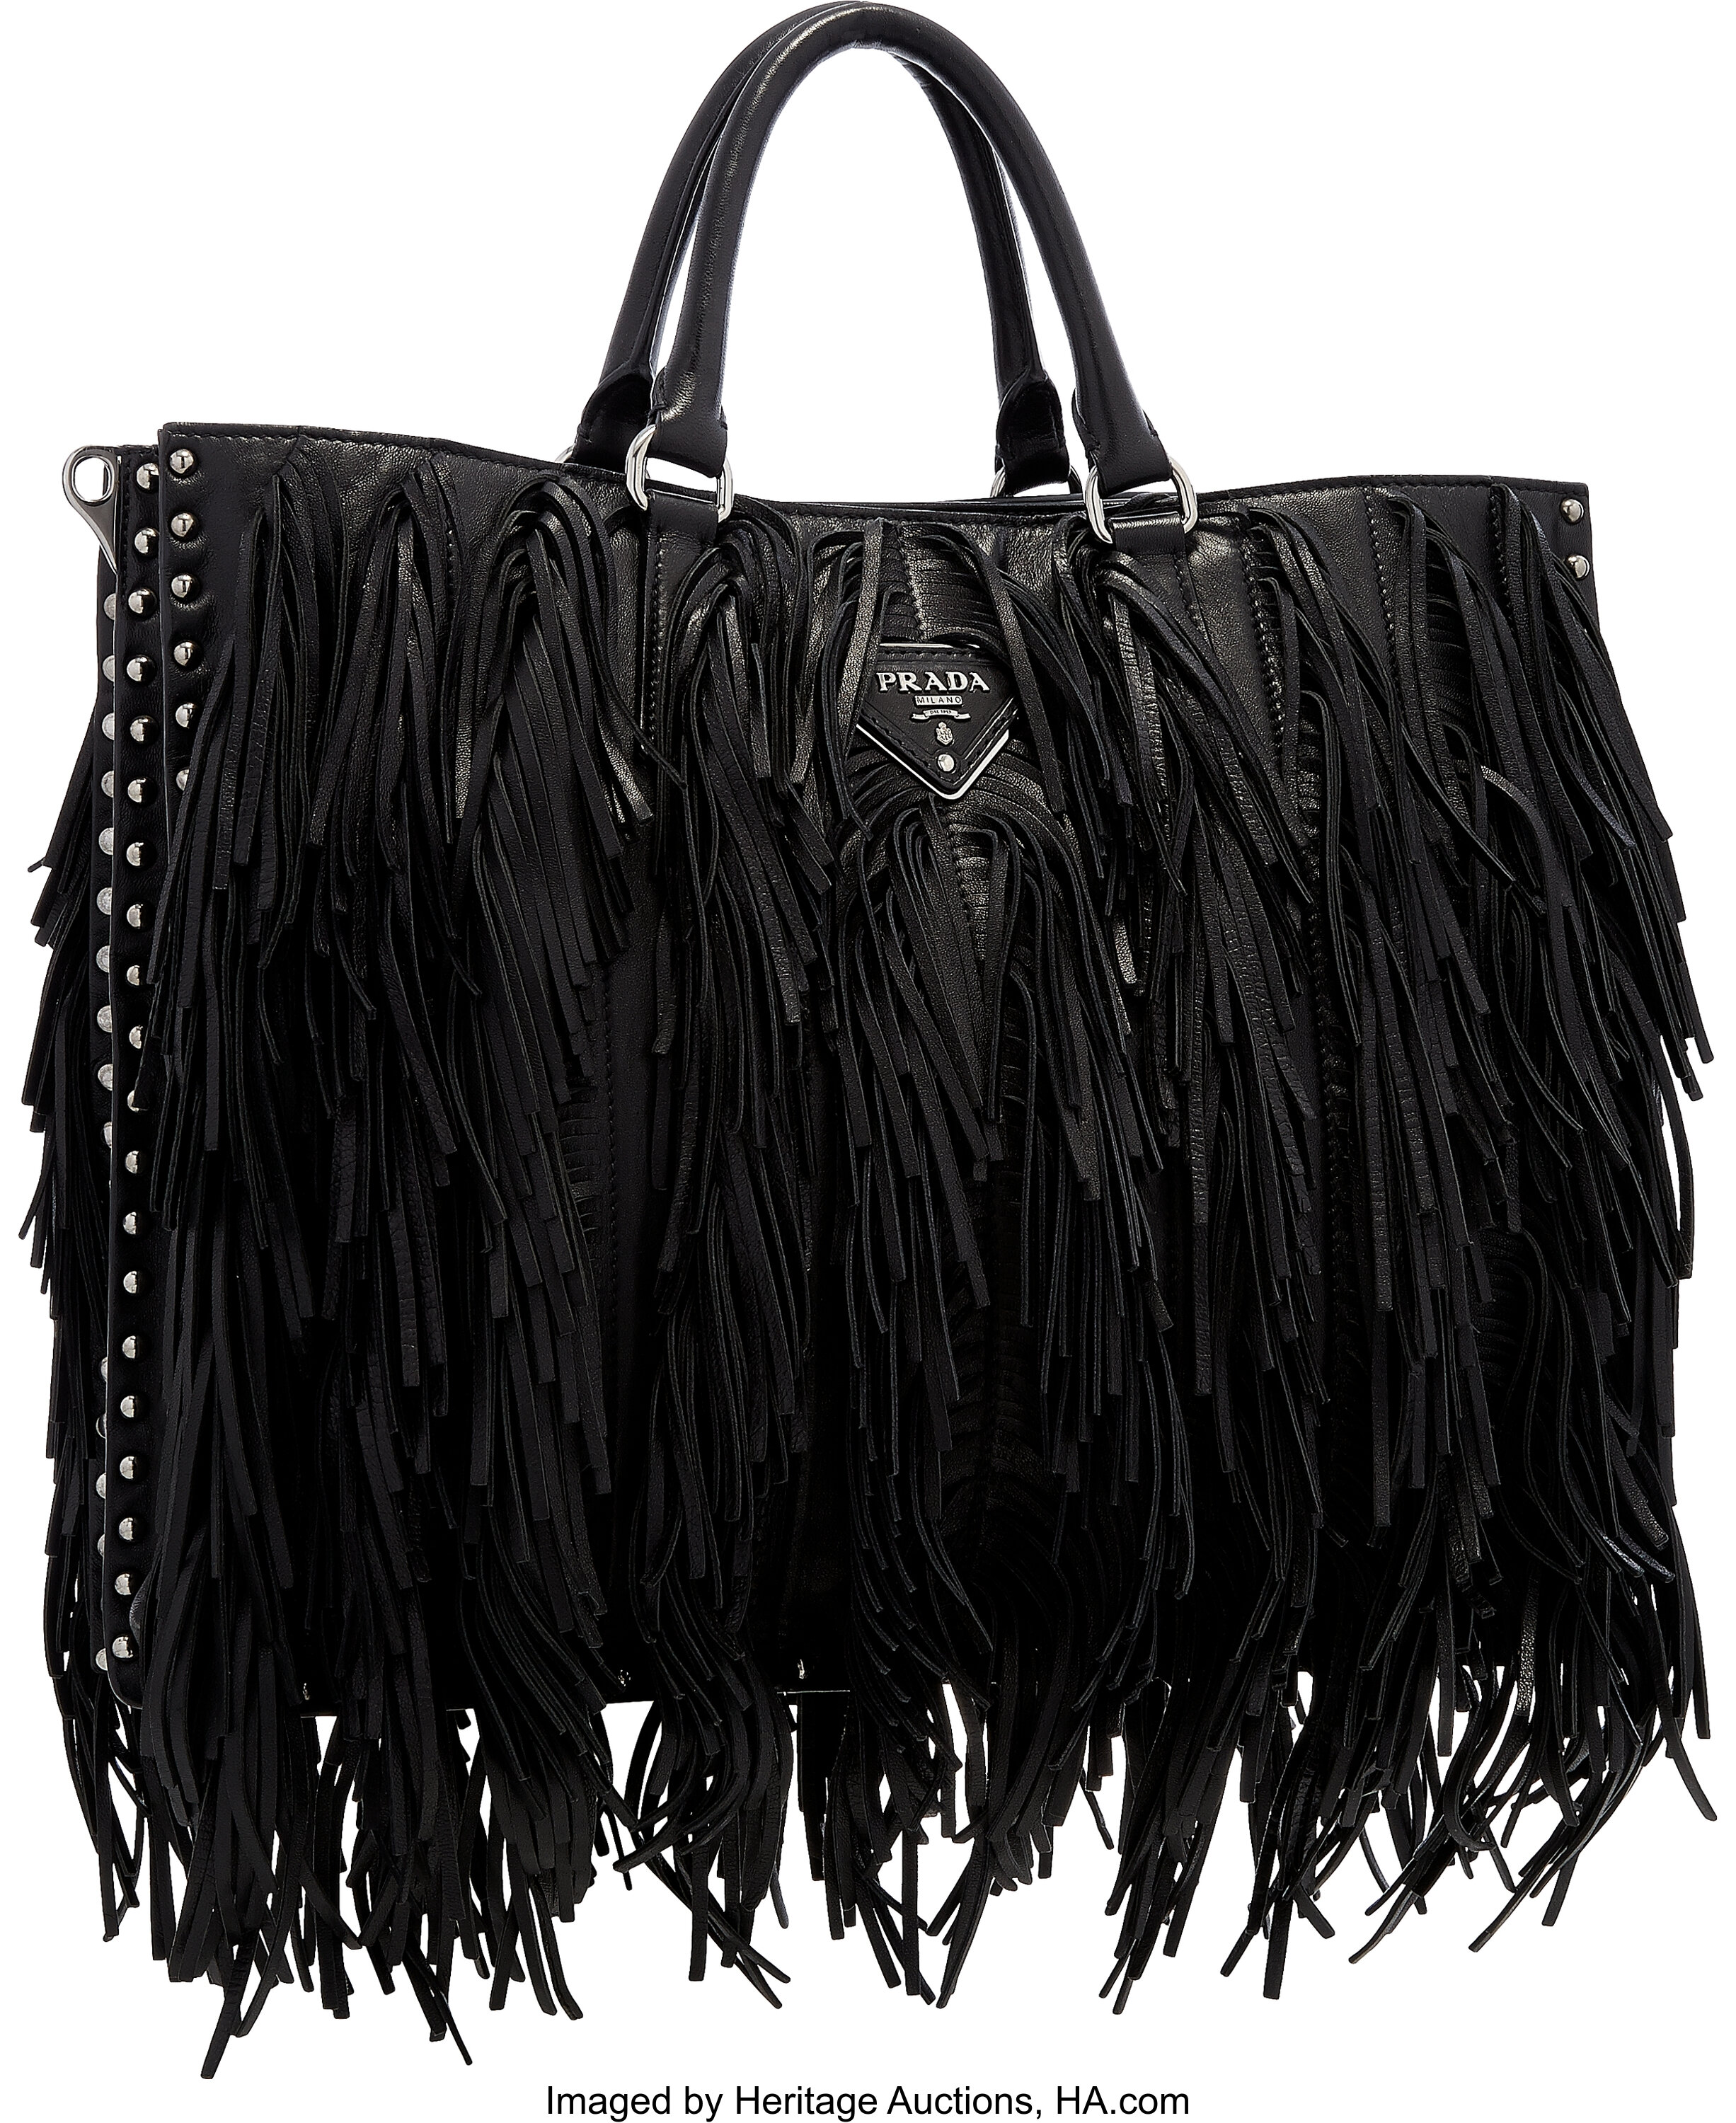 Prada Black Leather Fringe Tote Bag with Studded Accents . | Lot #58184 |  Heritage Auctions